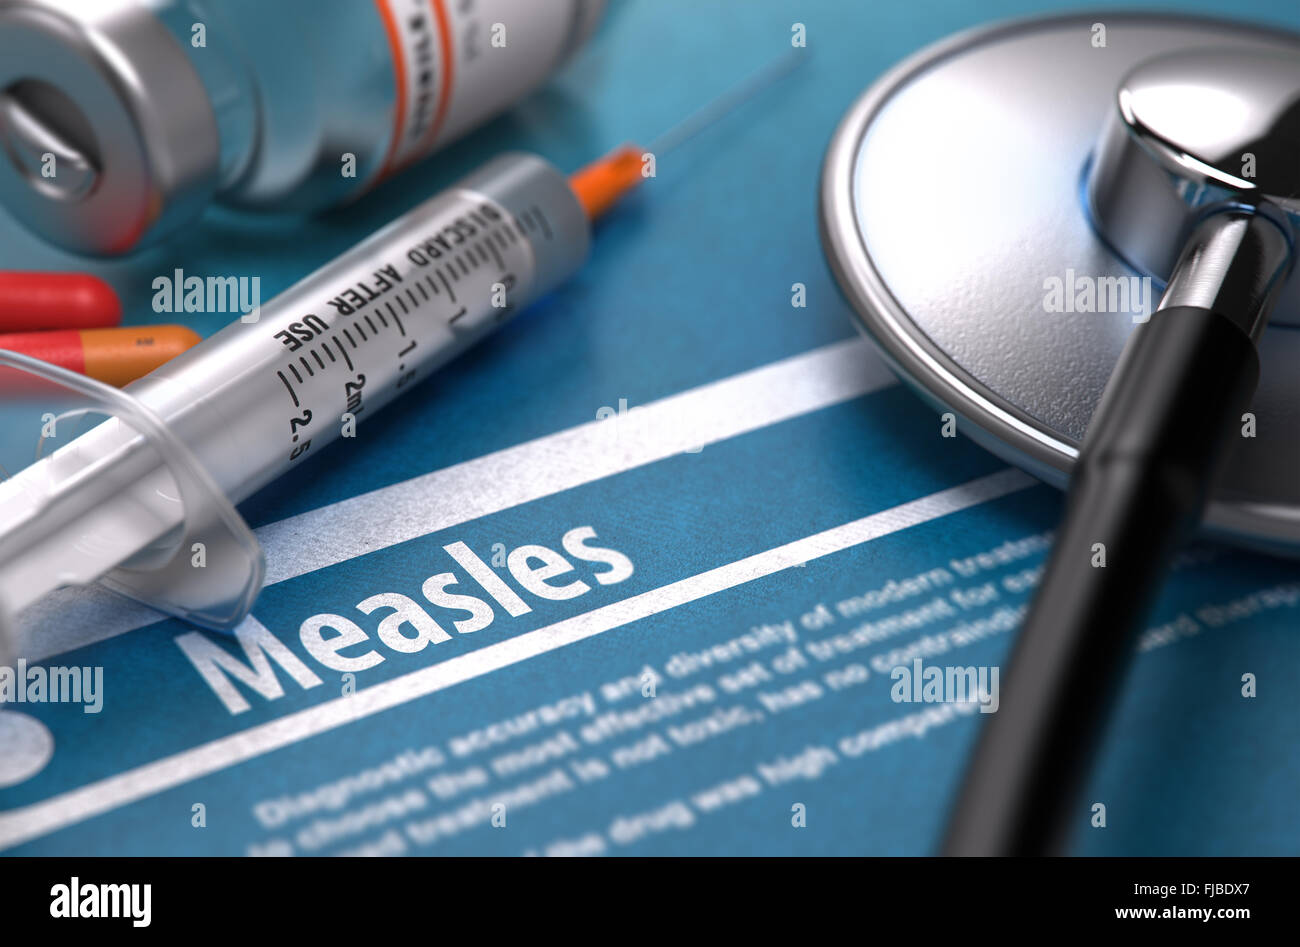 Measles. Medical Concept on Blue Background. Stock Photo